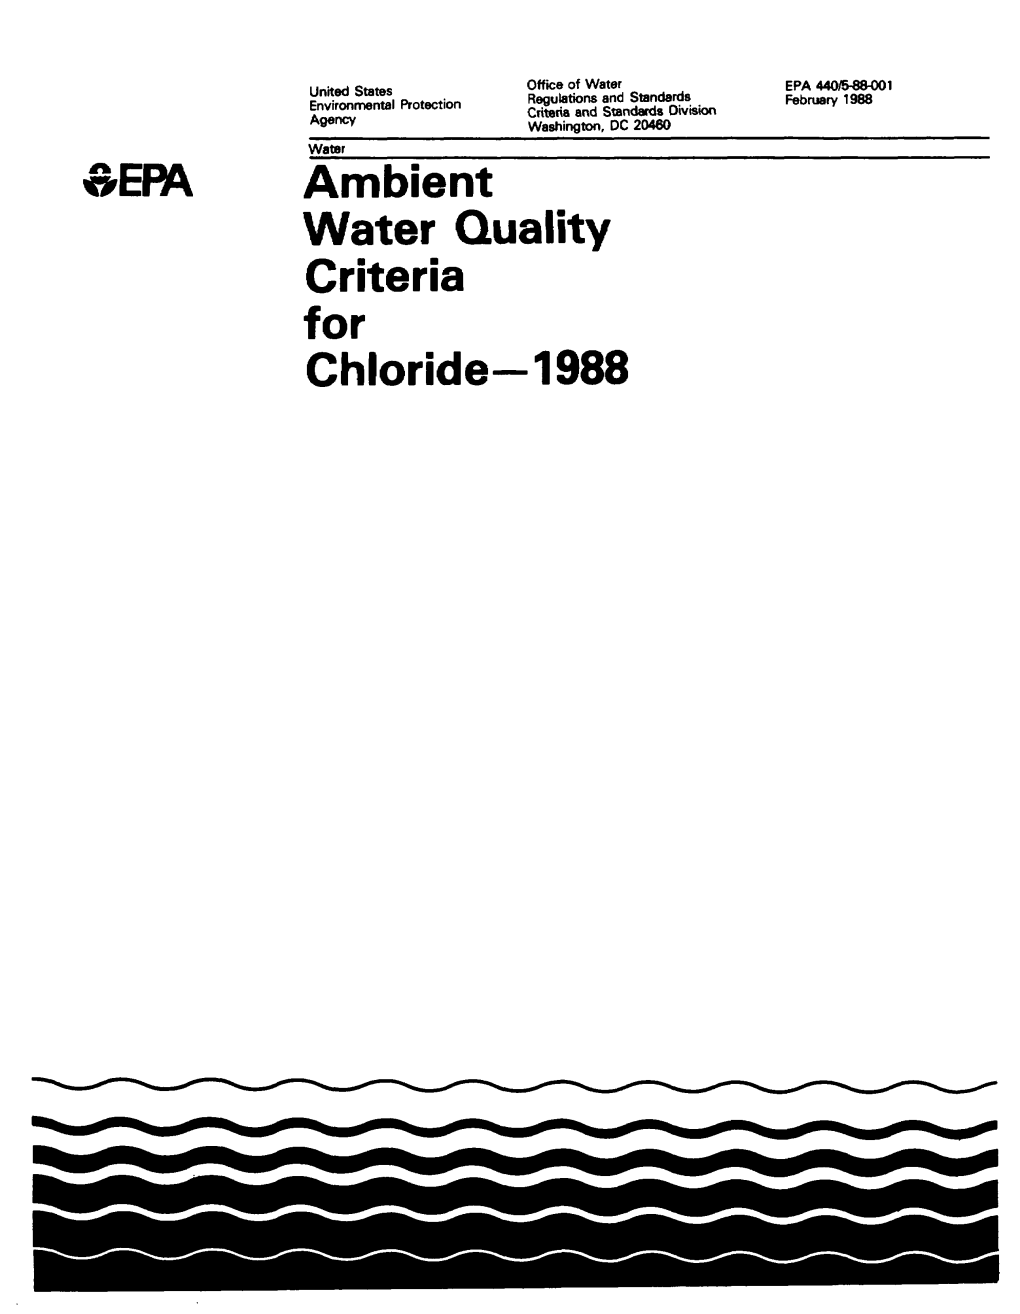 Ambient Water Quality for Chloride-1988